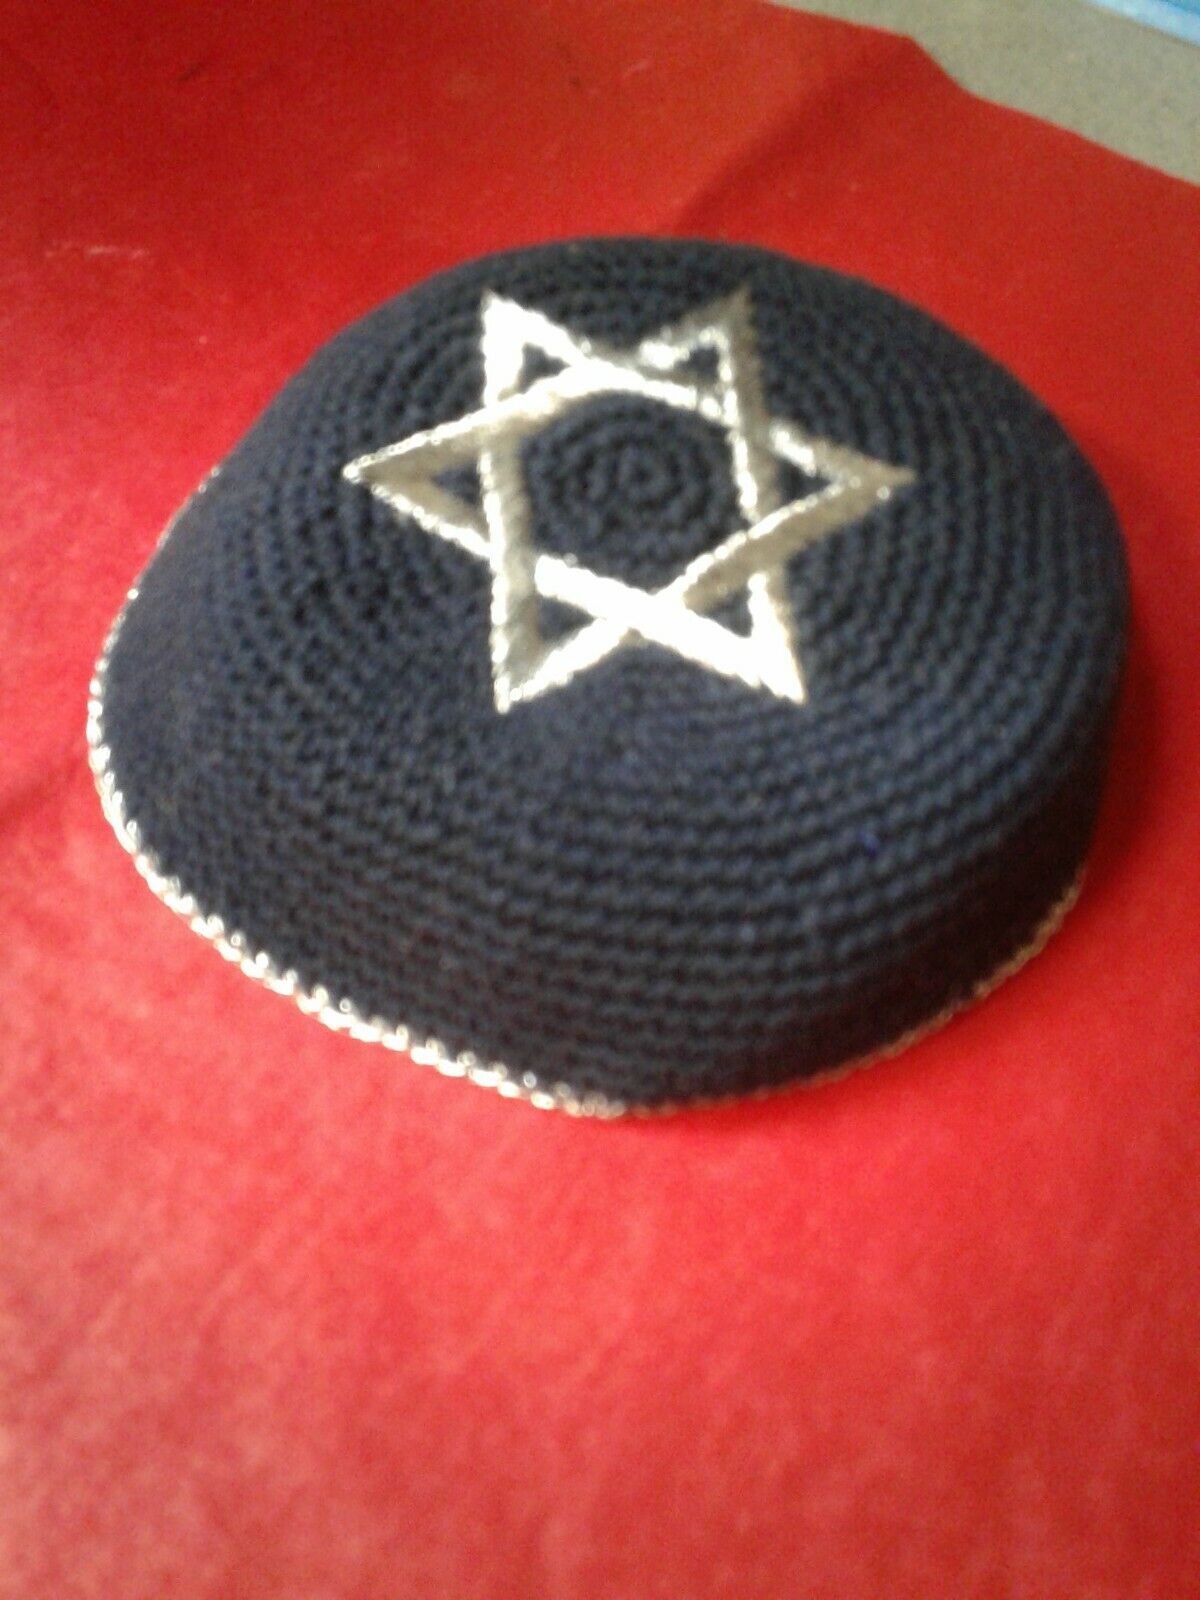 HAT THAT PEOPLE WEAR TO GO TO SYNAGOGUE  BOUGHT IN ISRAEL #61 BLUE AND SILVER